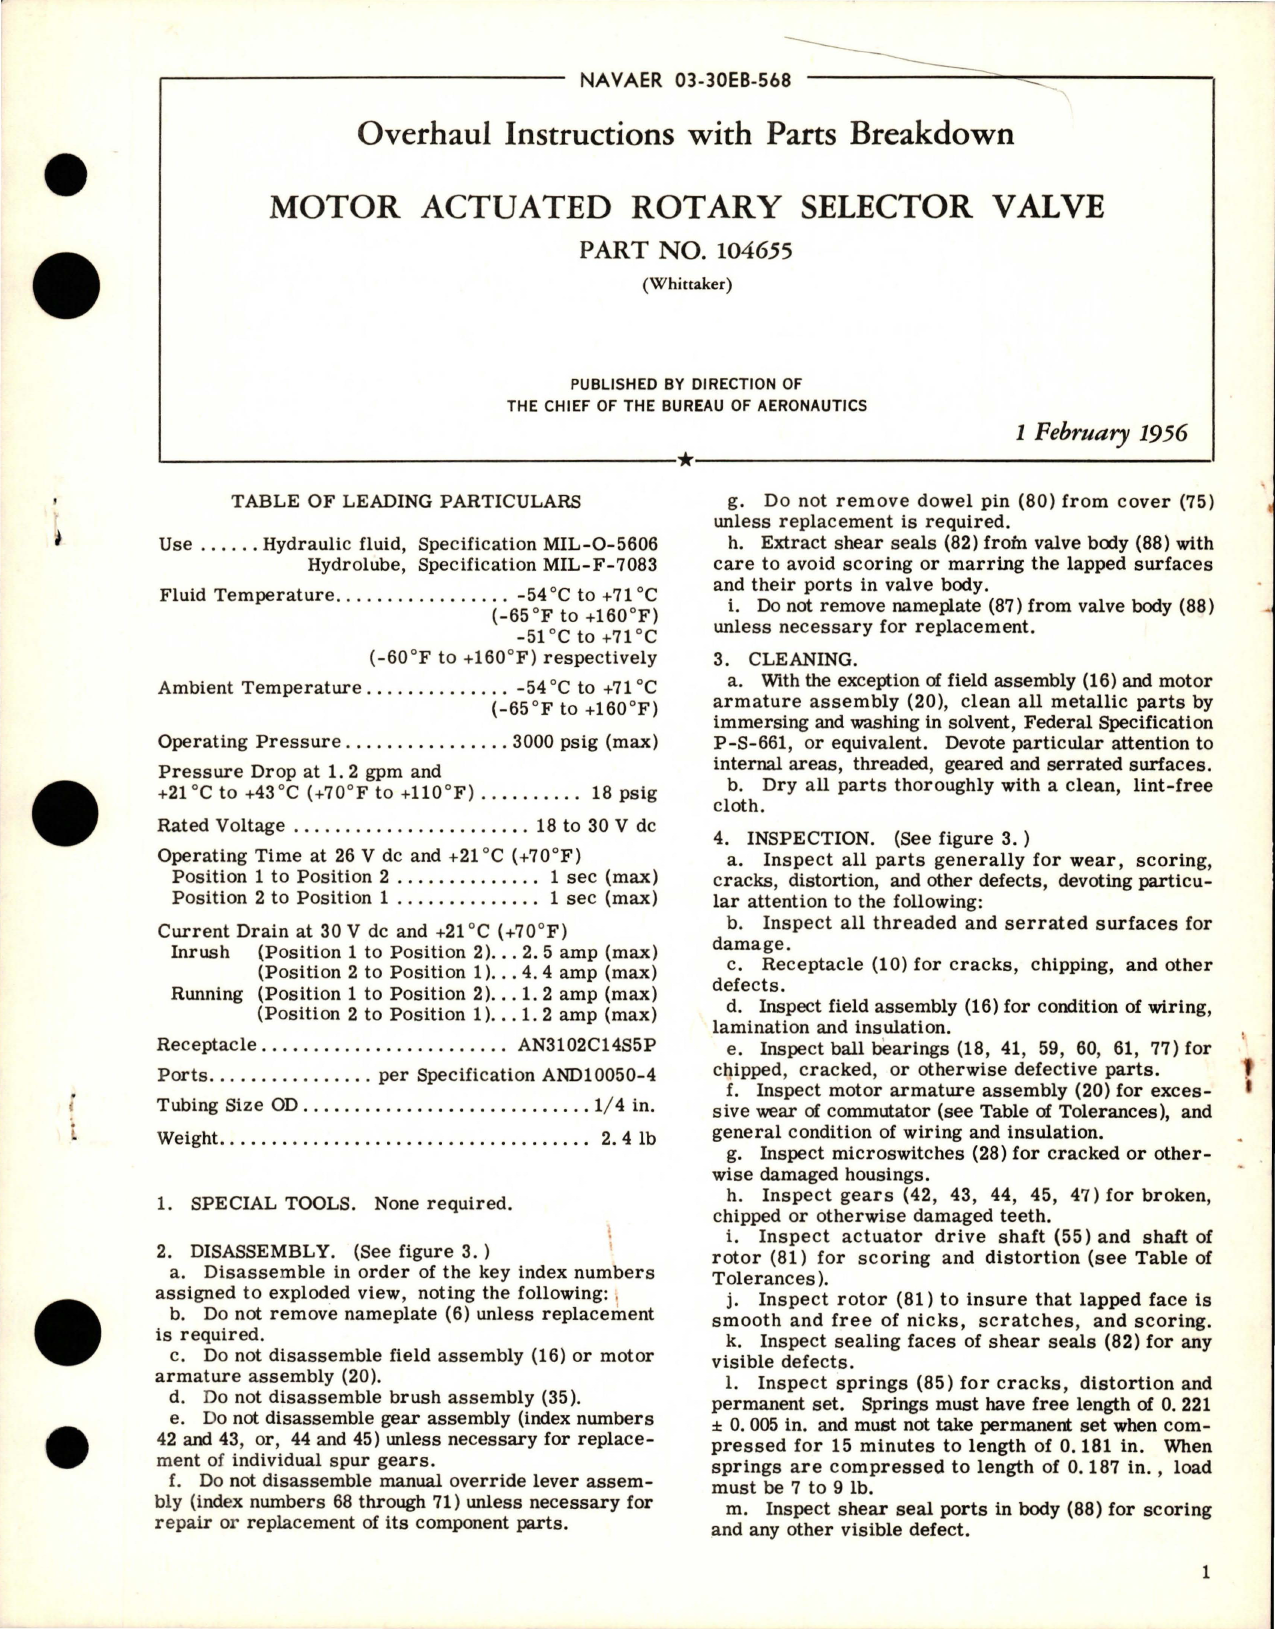 Sample page 1 from AirCorps Library document: Overhaul Instructions with Parts Breakdown for Motor Actuated Rotary Selector Valve - Part 104655